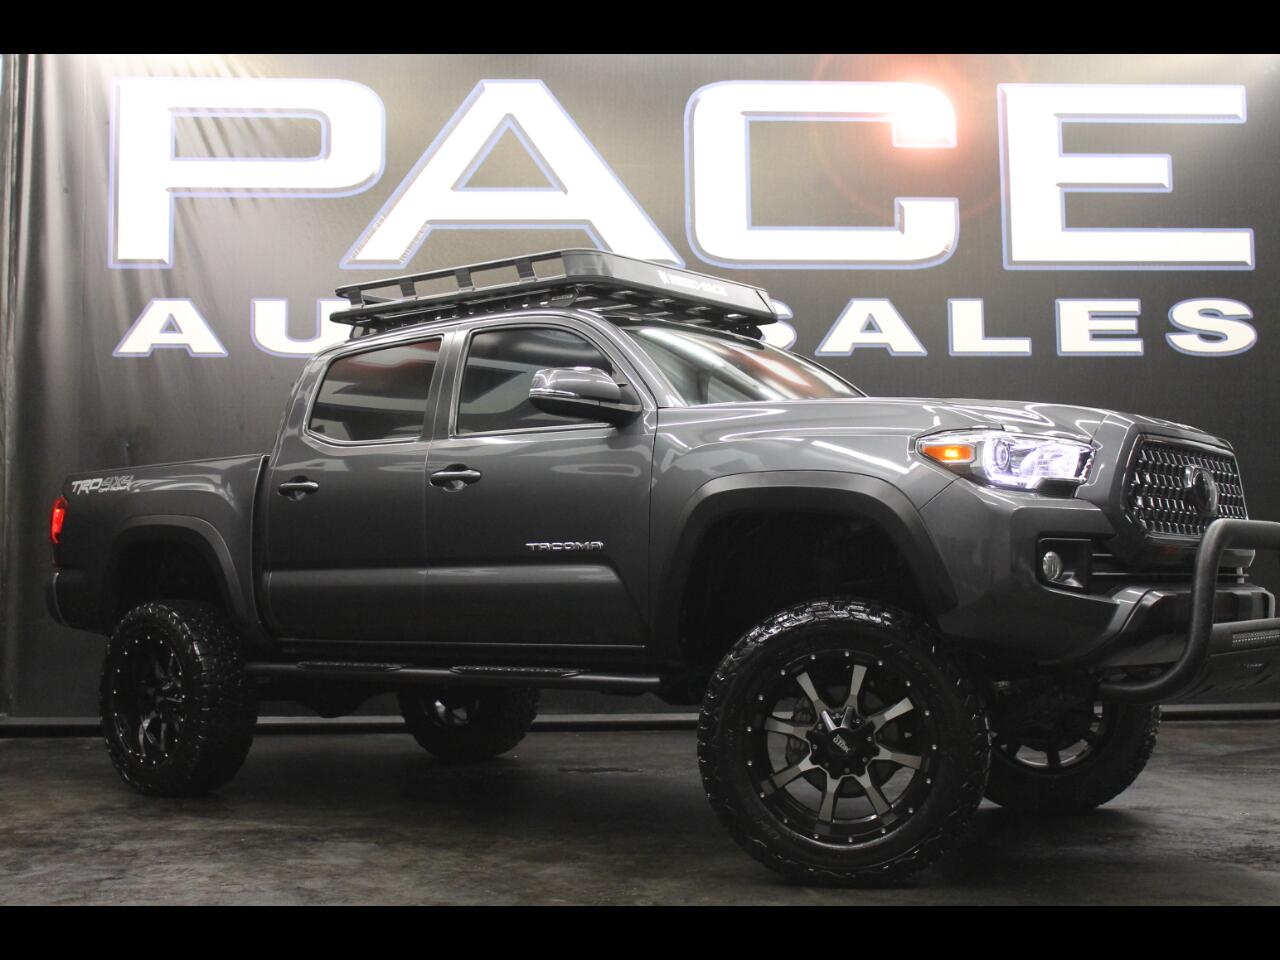 Used 2018 Toyota Tacoma Sold In Hattiesburg Ms 39402 Pace Auto Sales